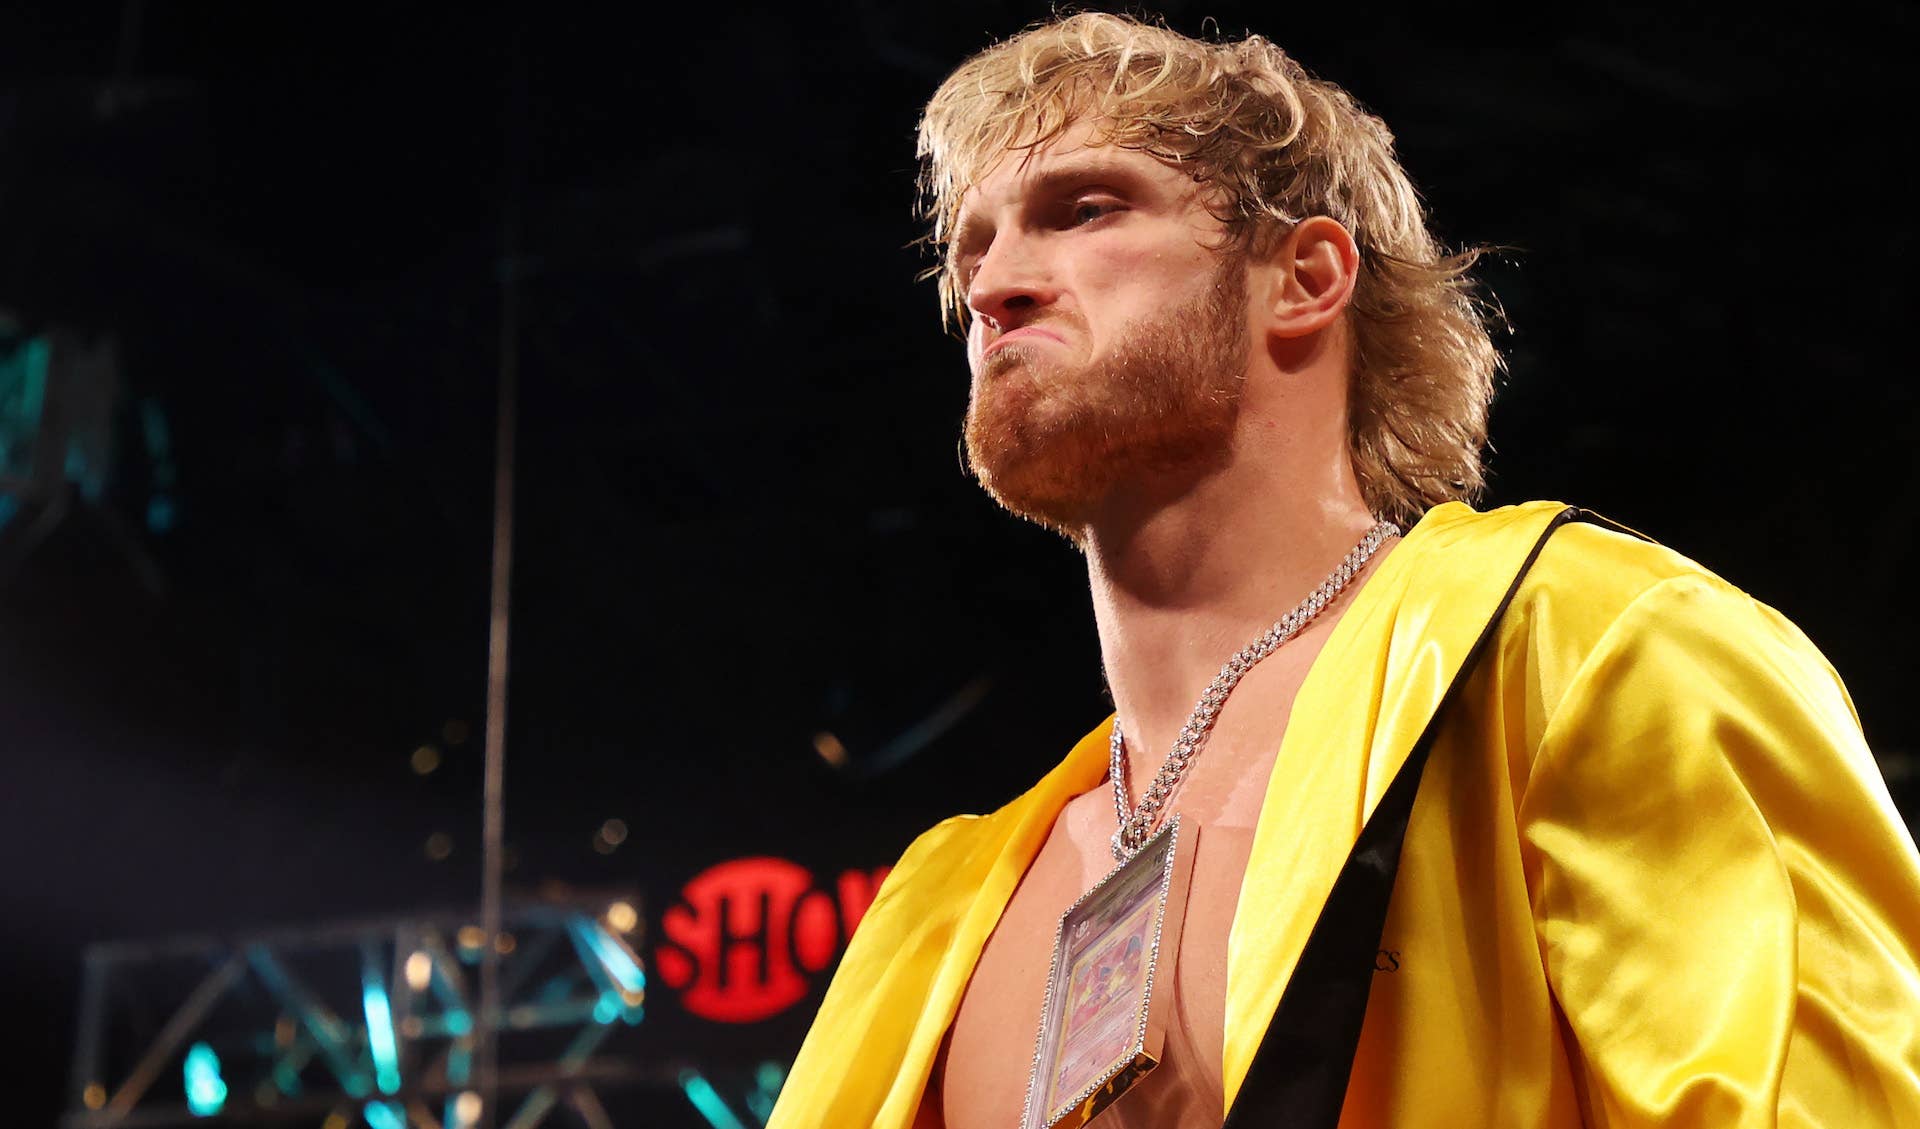 Logan Paul joining the WWE now